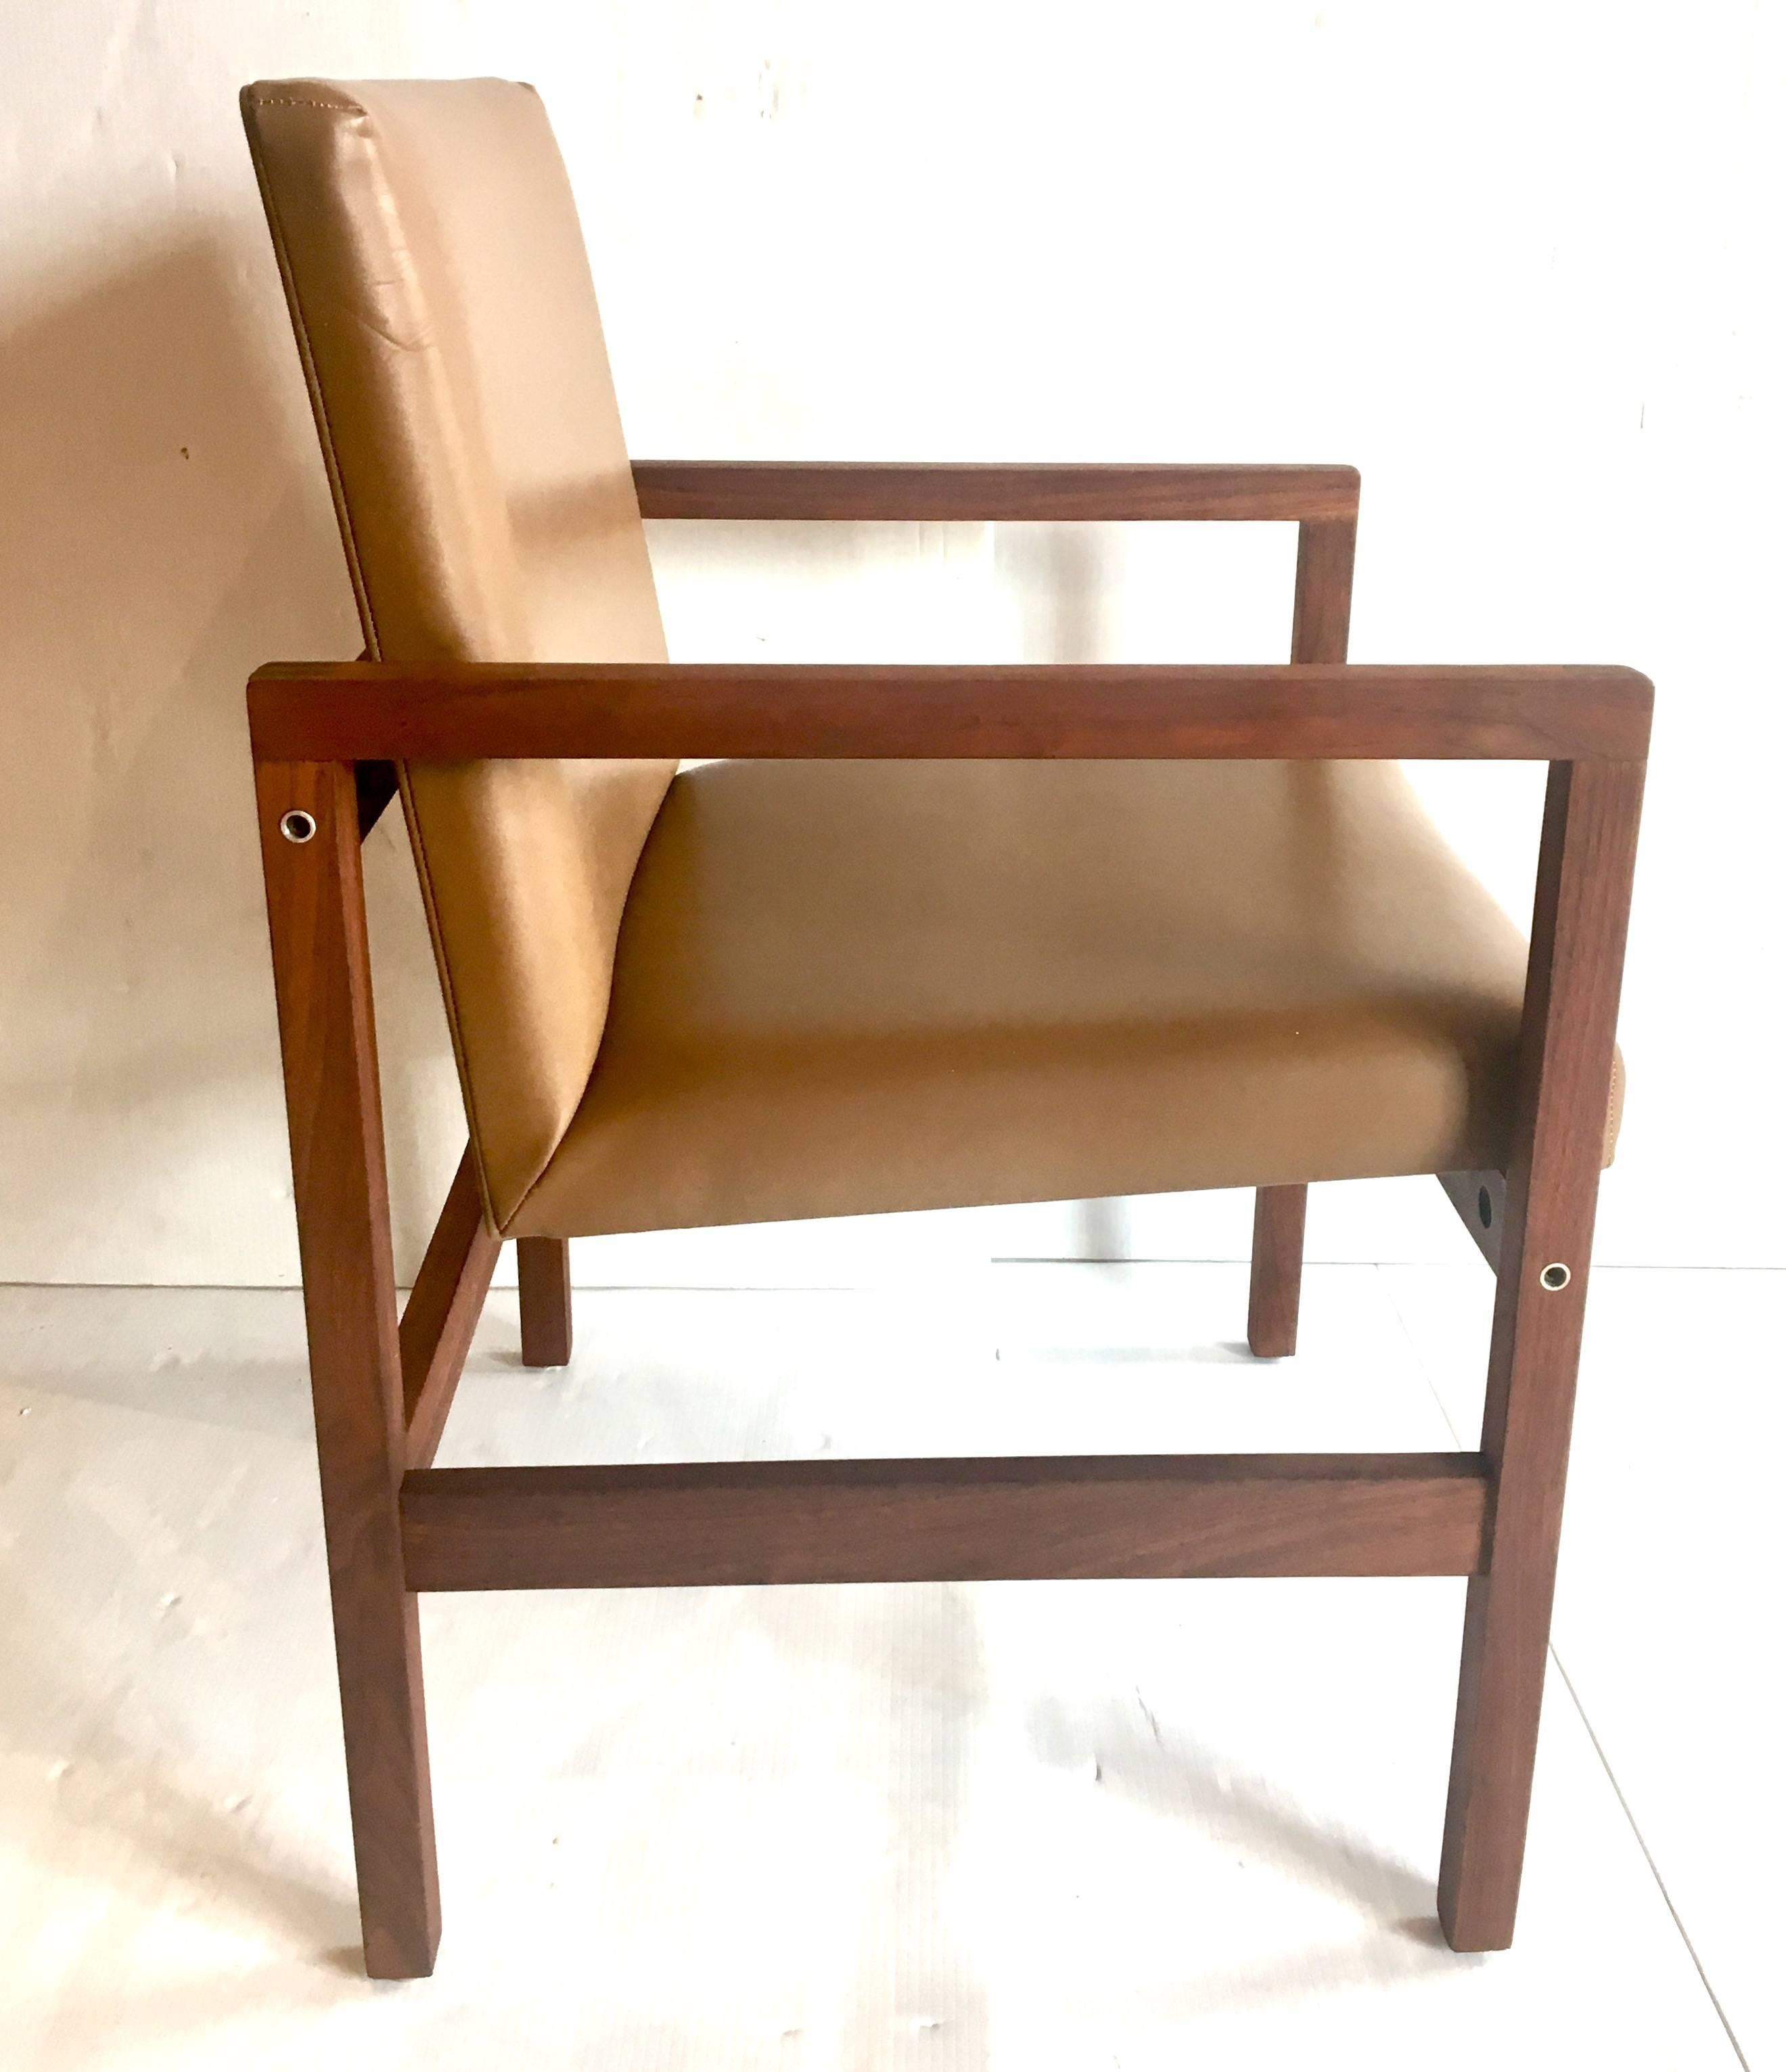 Amazing pair of solid walnut frames, with Naugahyde fabric armchairs, circa 1950s, great craftsmanship the chairs have been restored and cleaned solid and sturdy very clean and nice condition, nice dovetail detail on each angle with polished